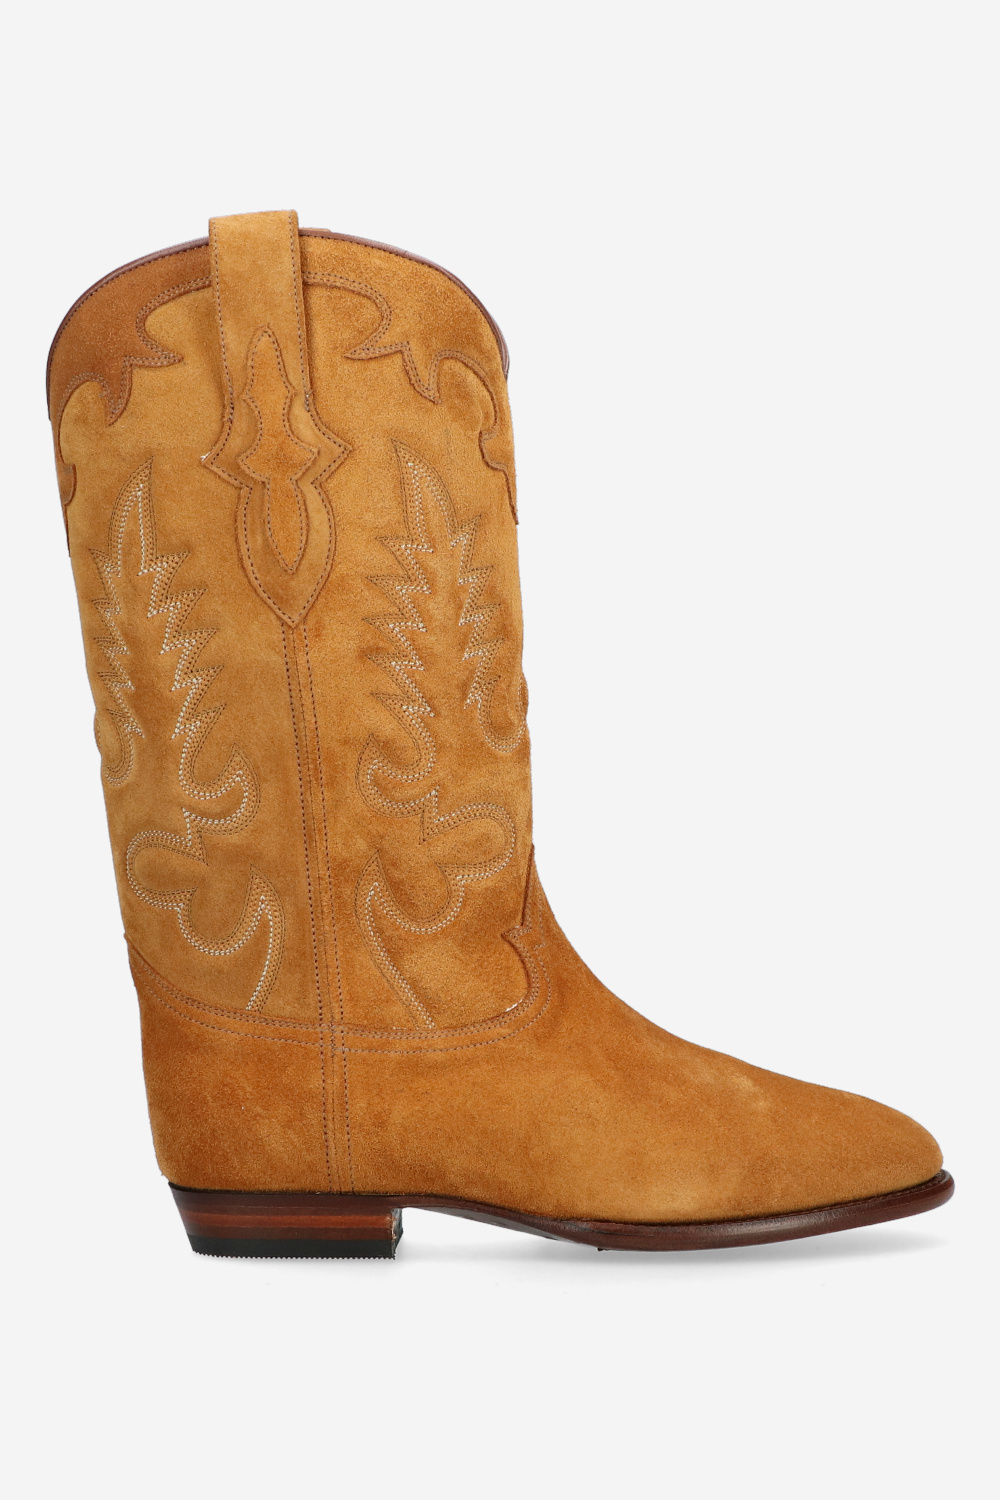 Shiloh Heritage Boots Camel